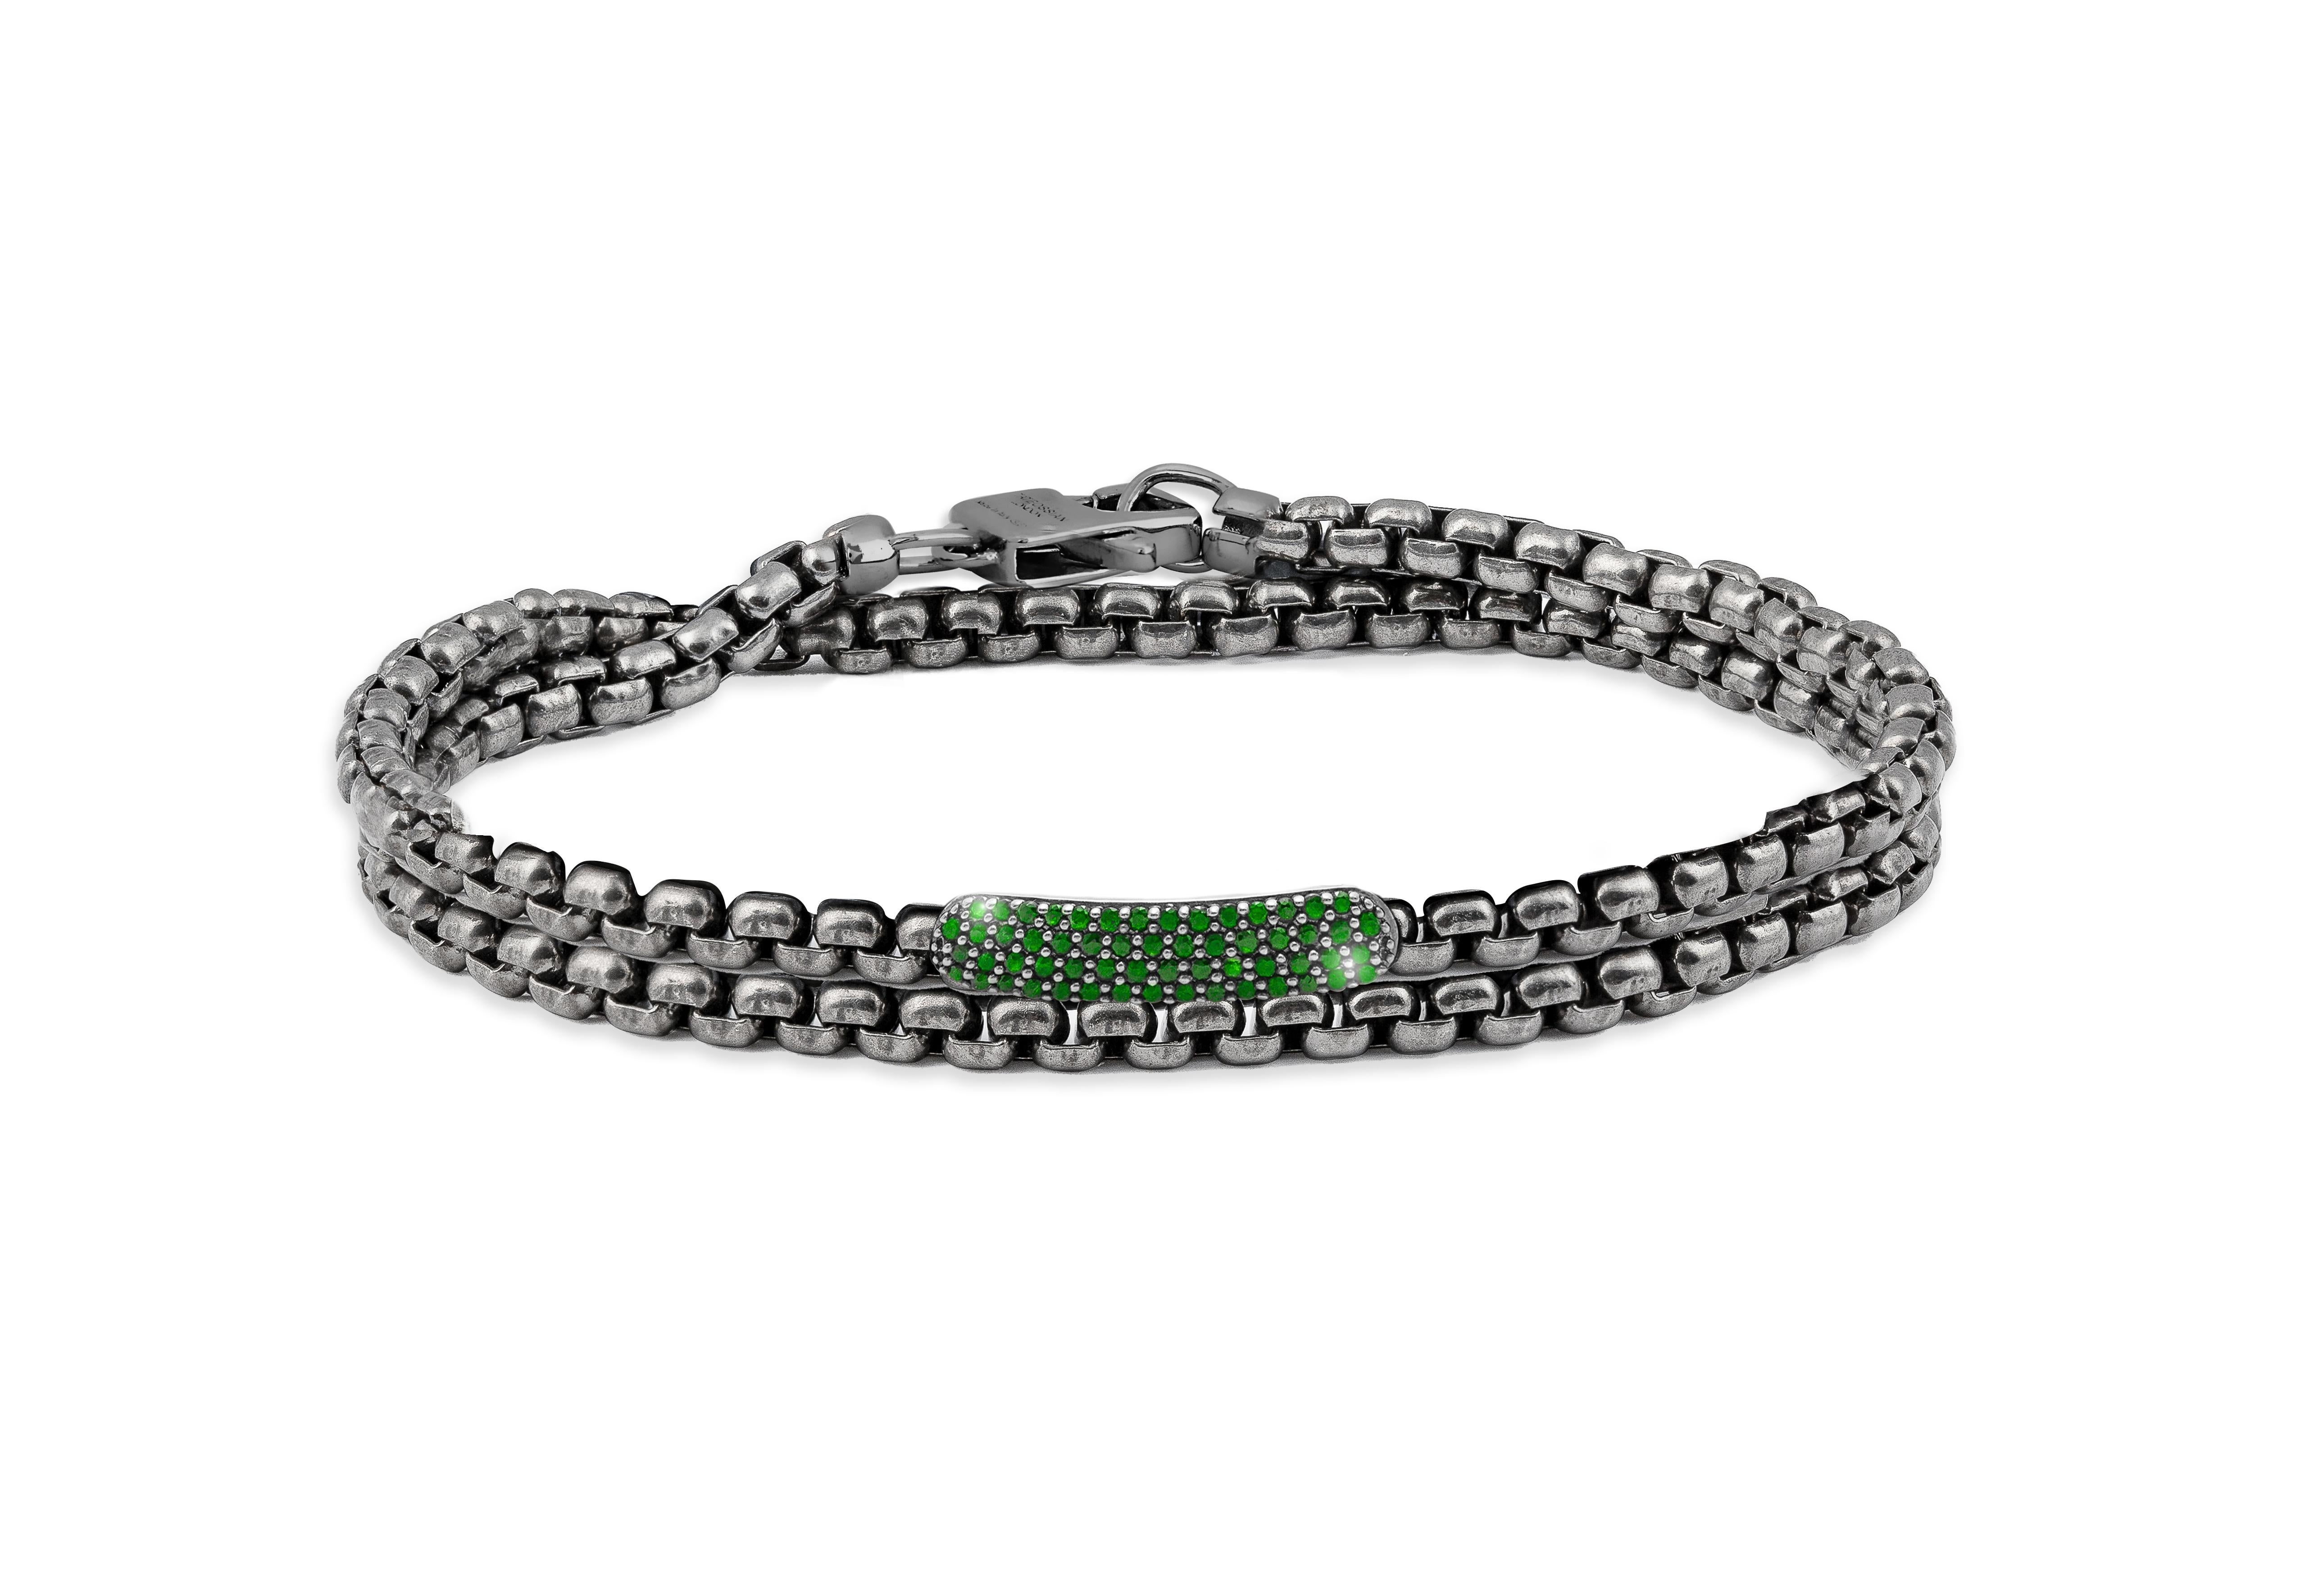 Black Rhodium Plated Sterling Silver Catena Baton Bracelet with Emeralds, Size M In New Condition For Sale In Fulham business exchange, London